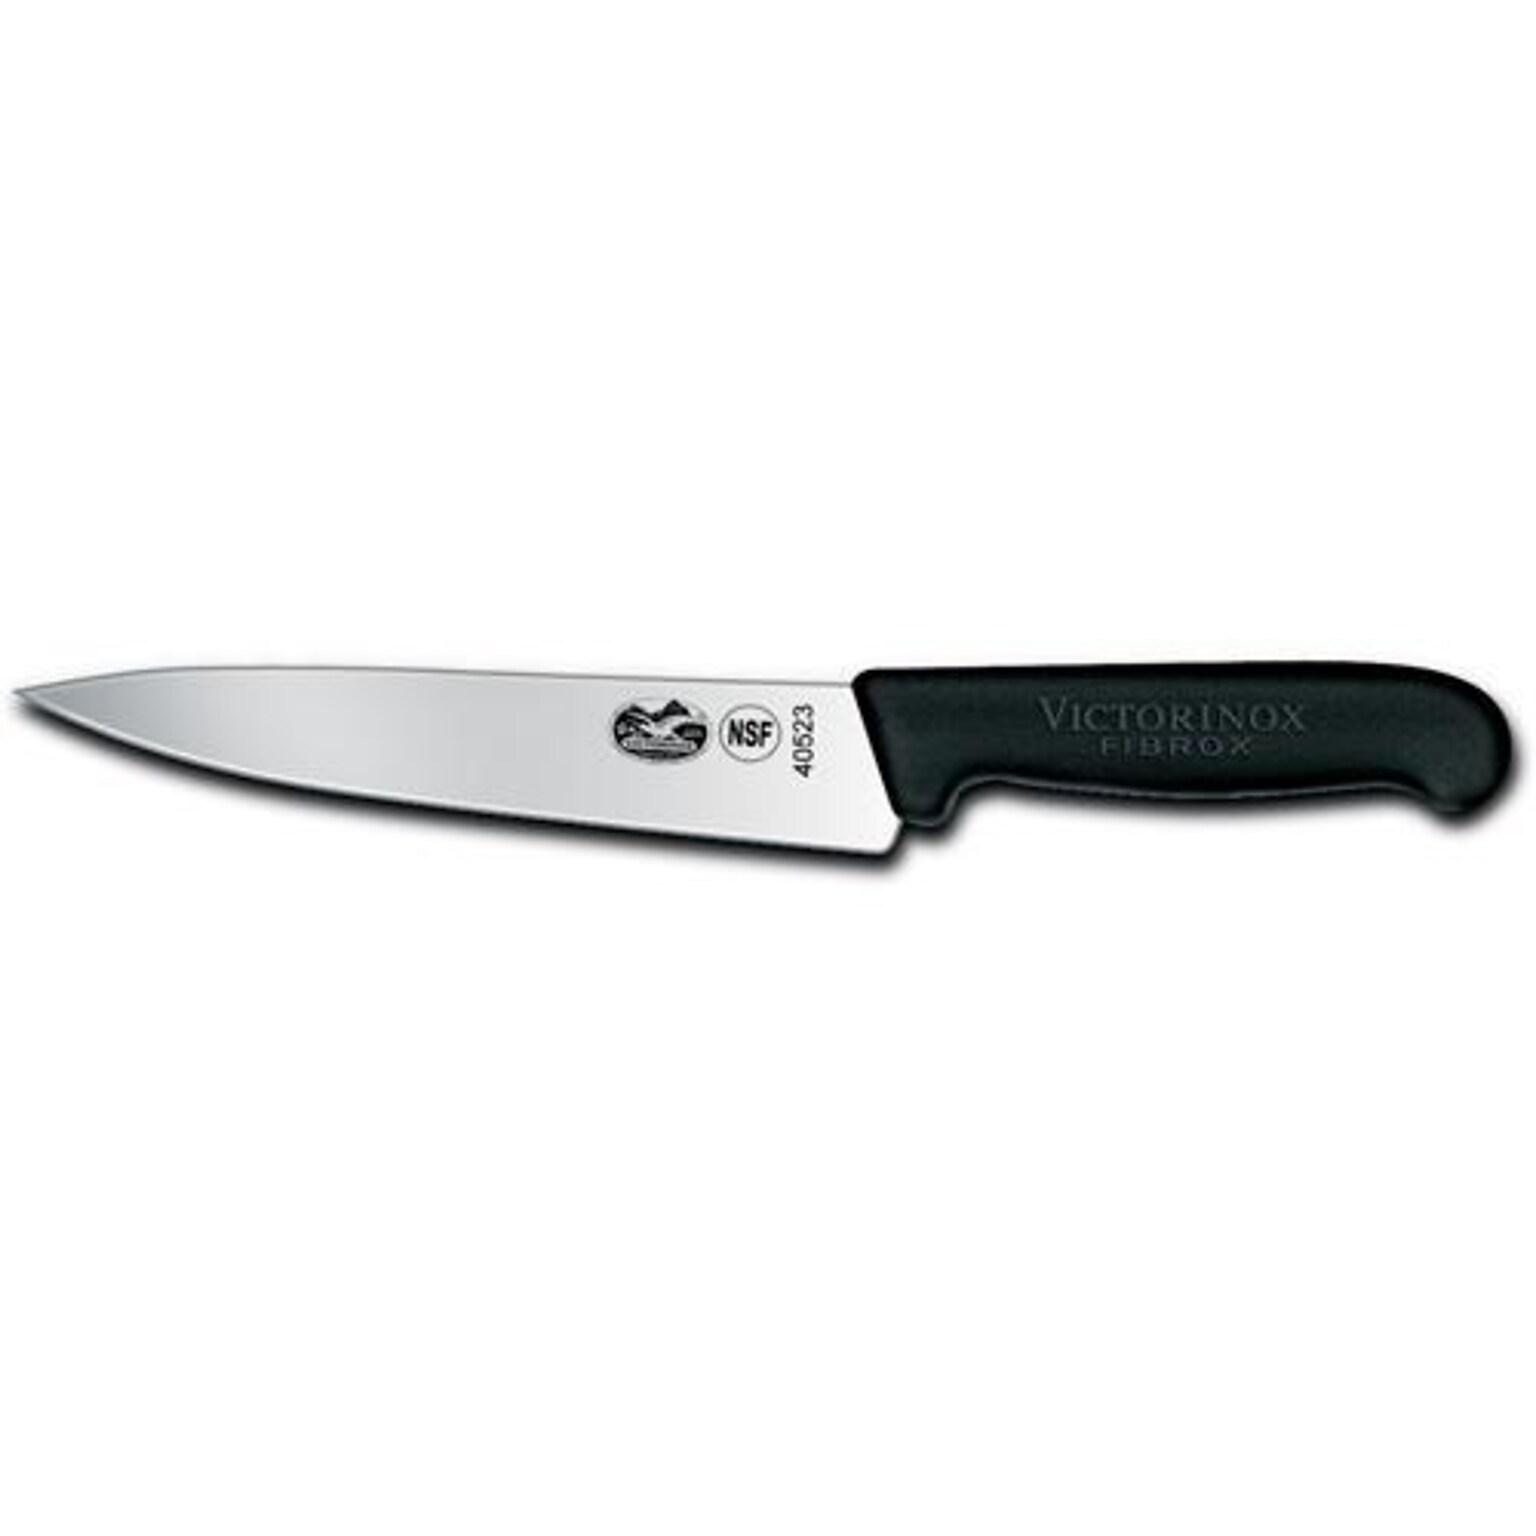 Victorinox 7 1/2 High Carbon Steel Chef Knife (40523)